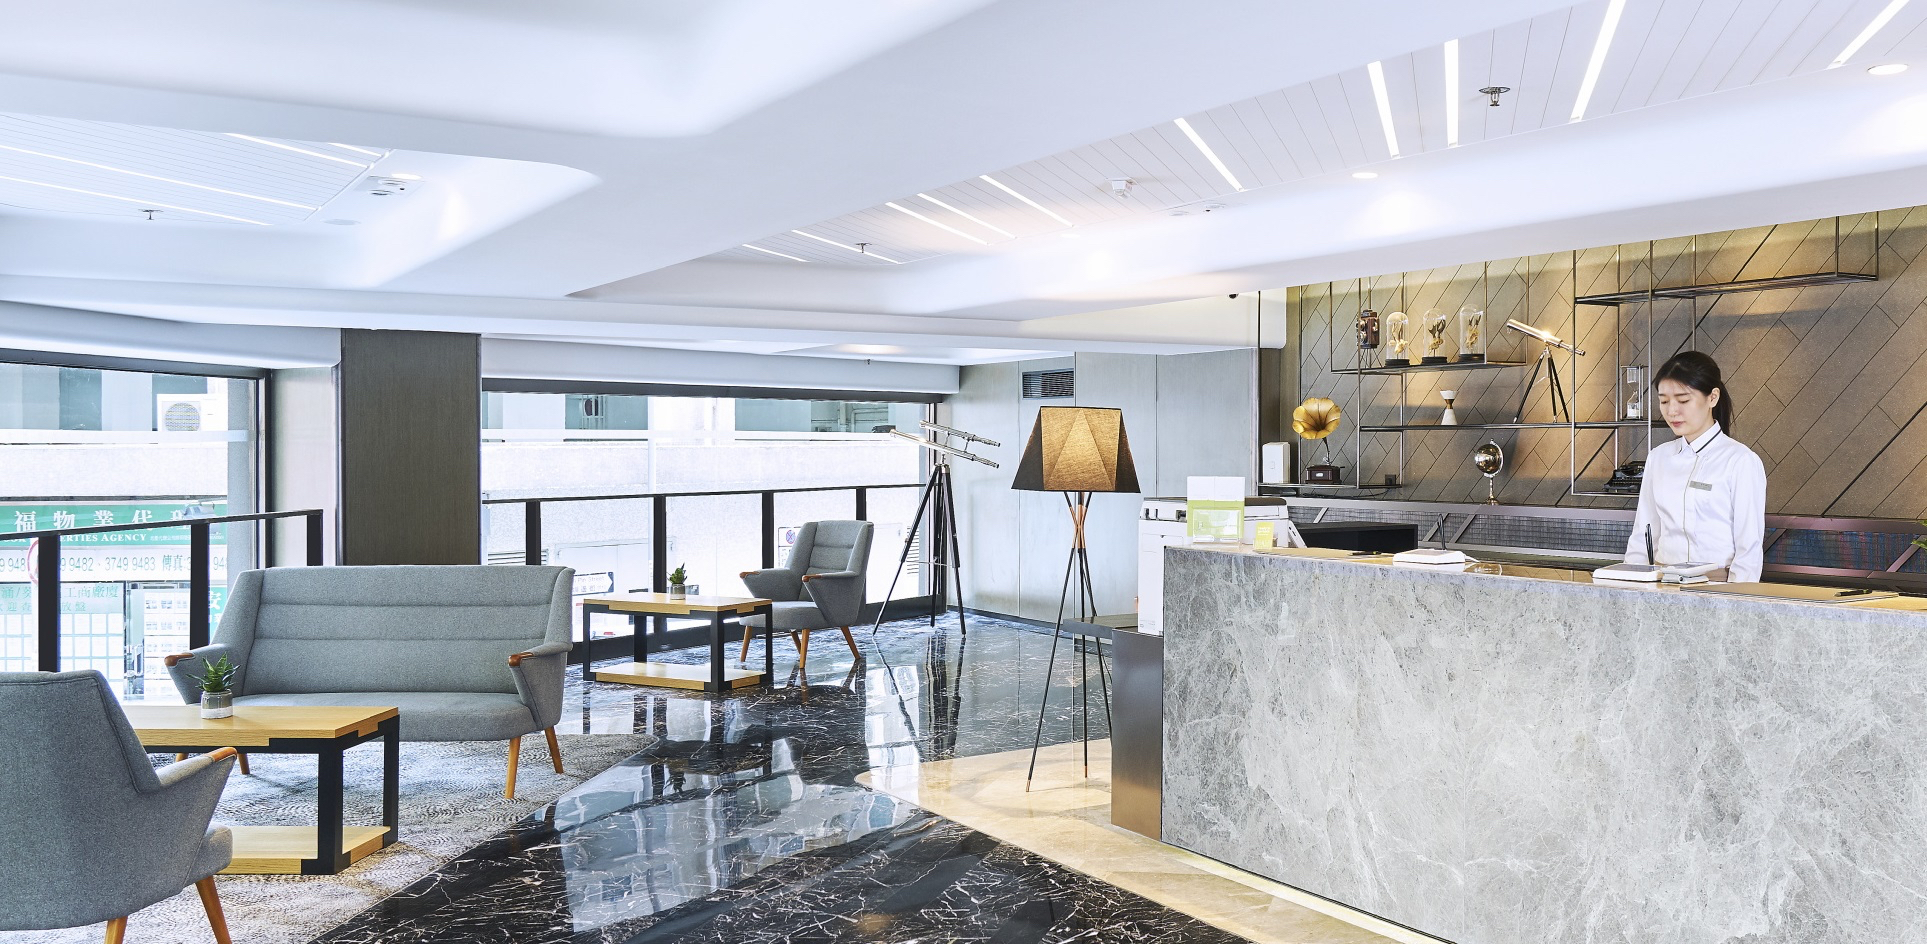 Hotel Ease-Tsuen Wan is the first B Corp hotel in Asia